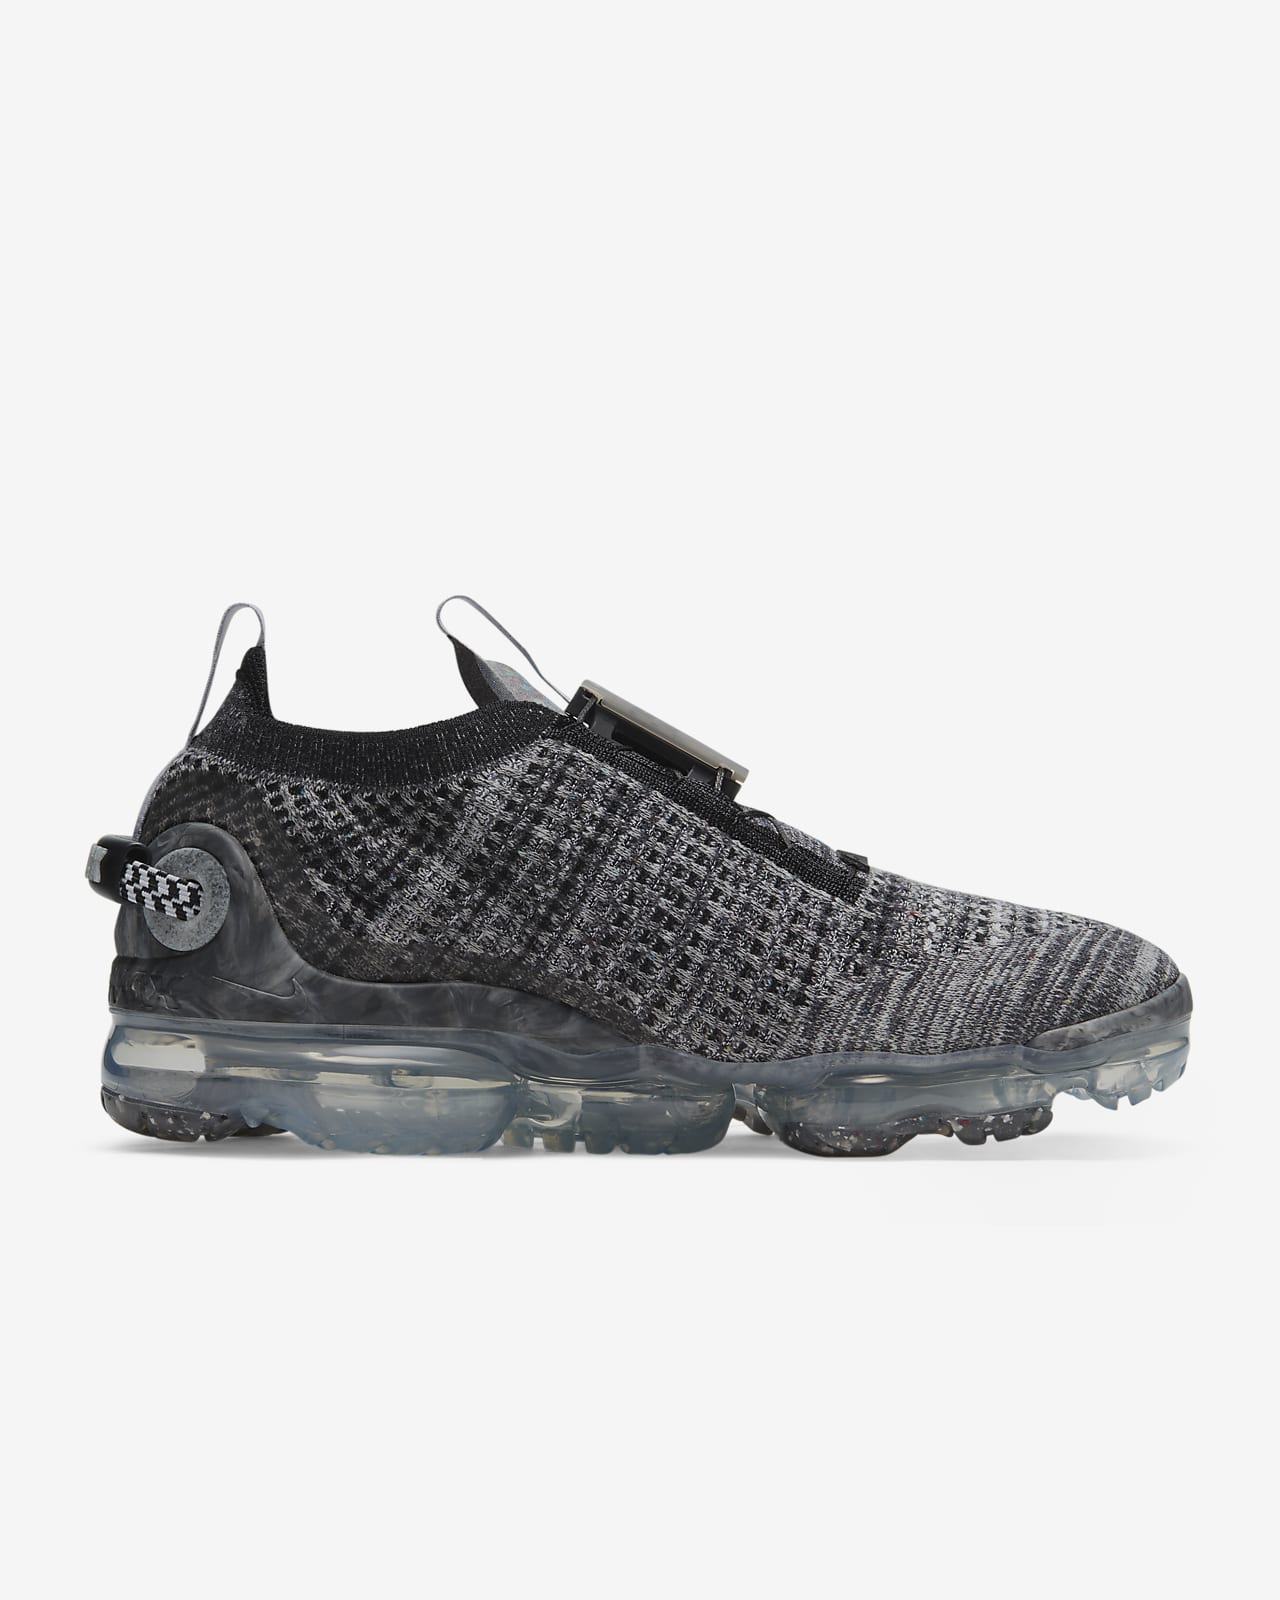 nike air vapormax with writing